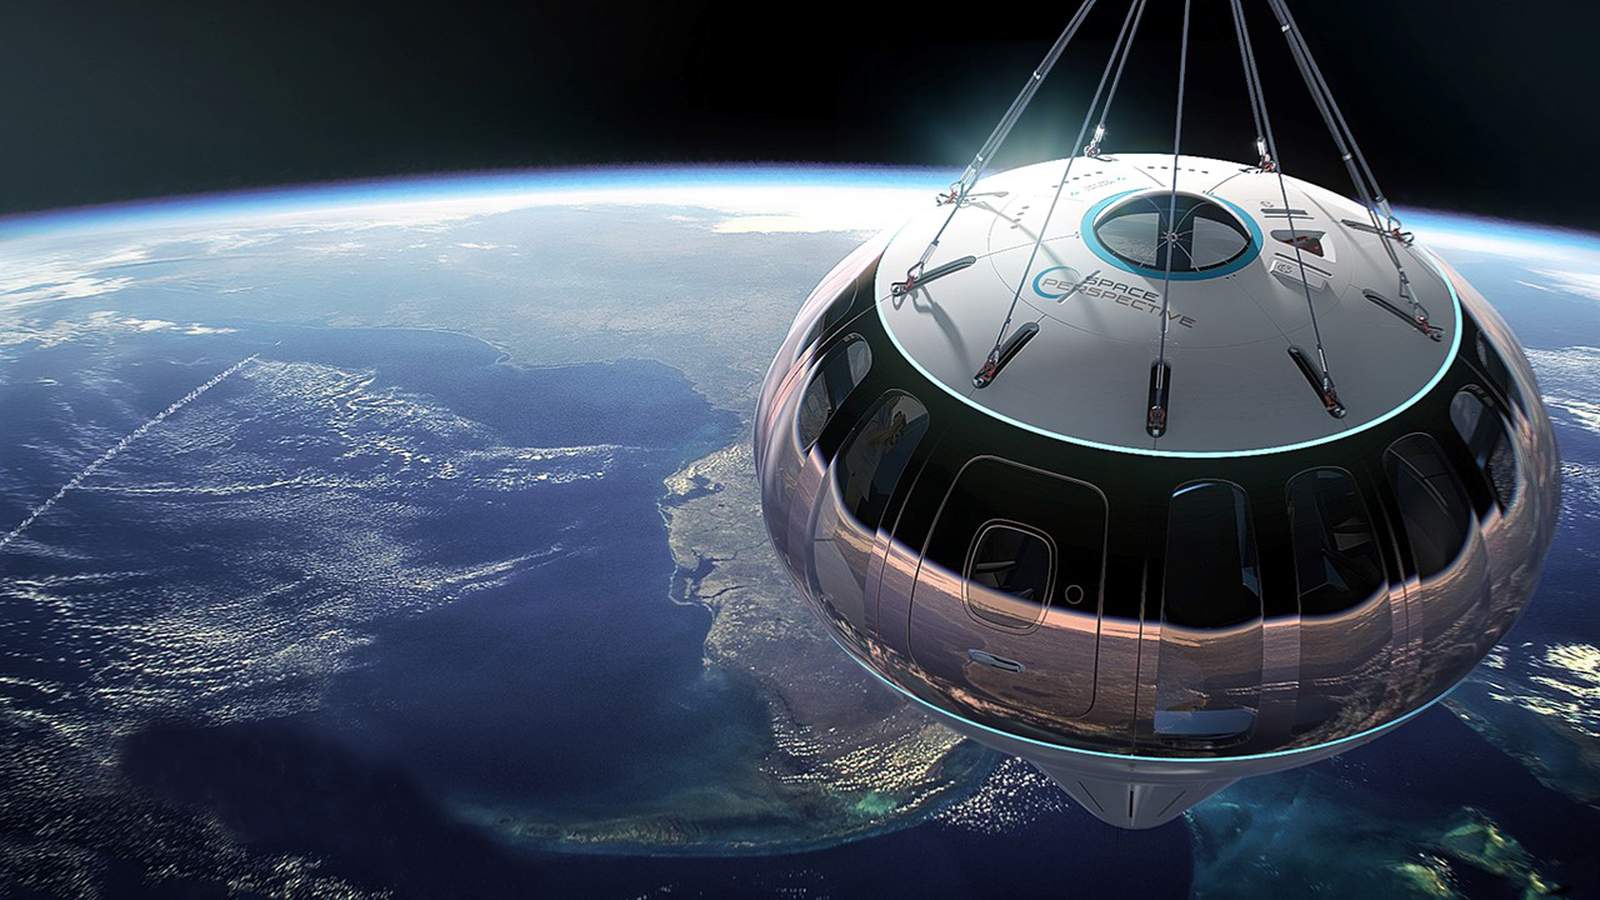 Startup plans to launch people in giant balloon to edge of space from Kennedy Space Center